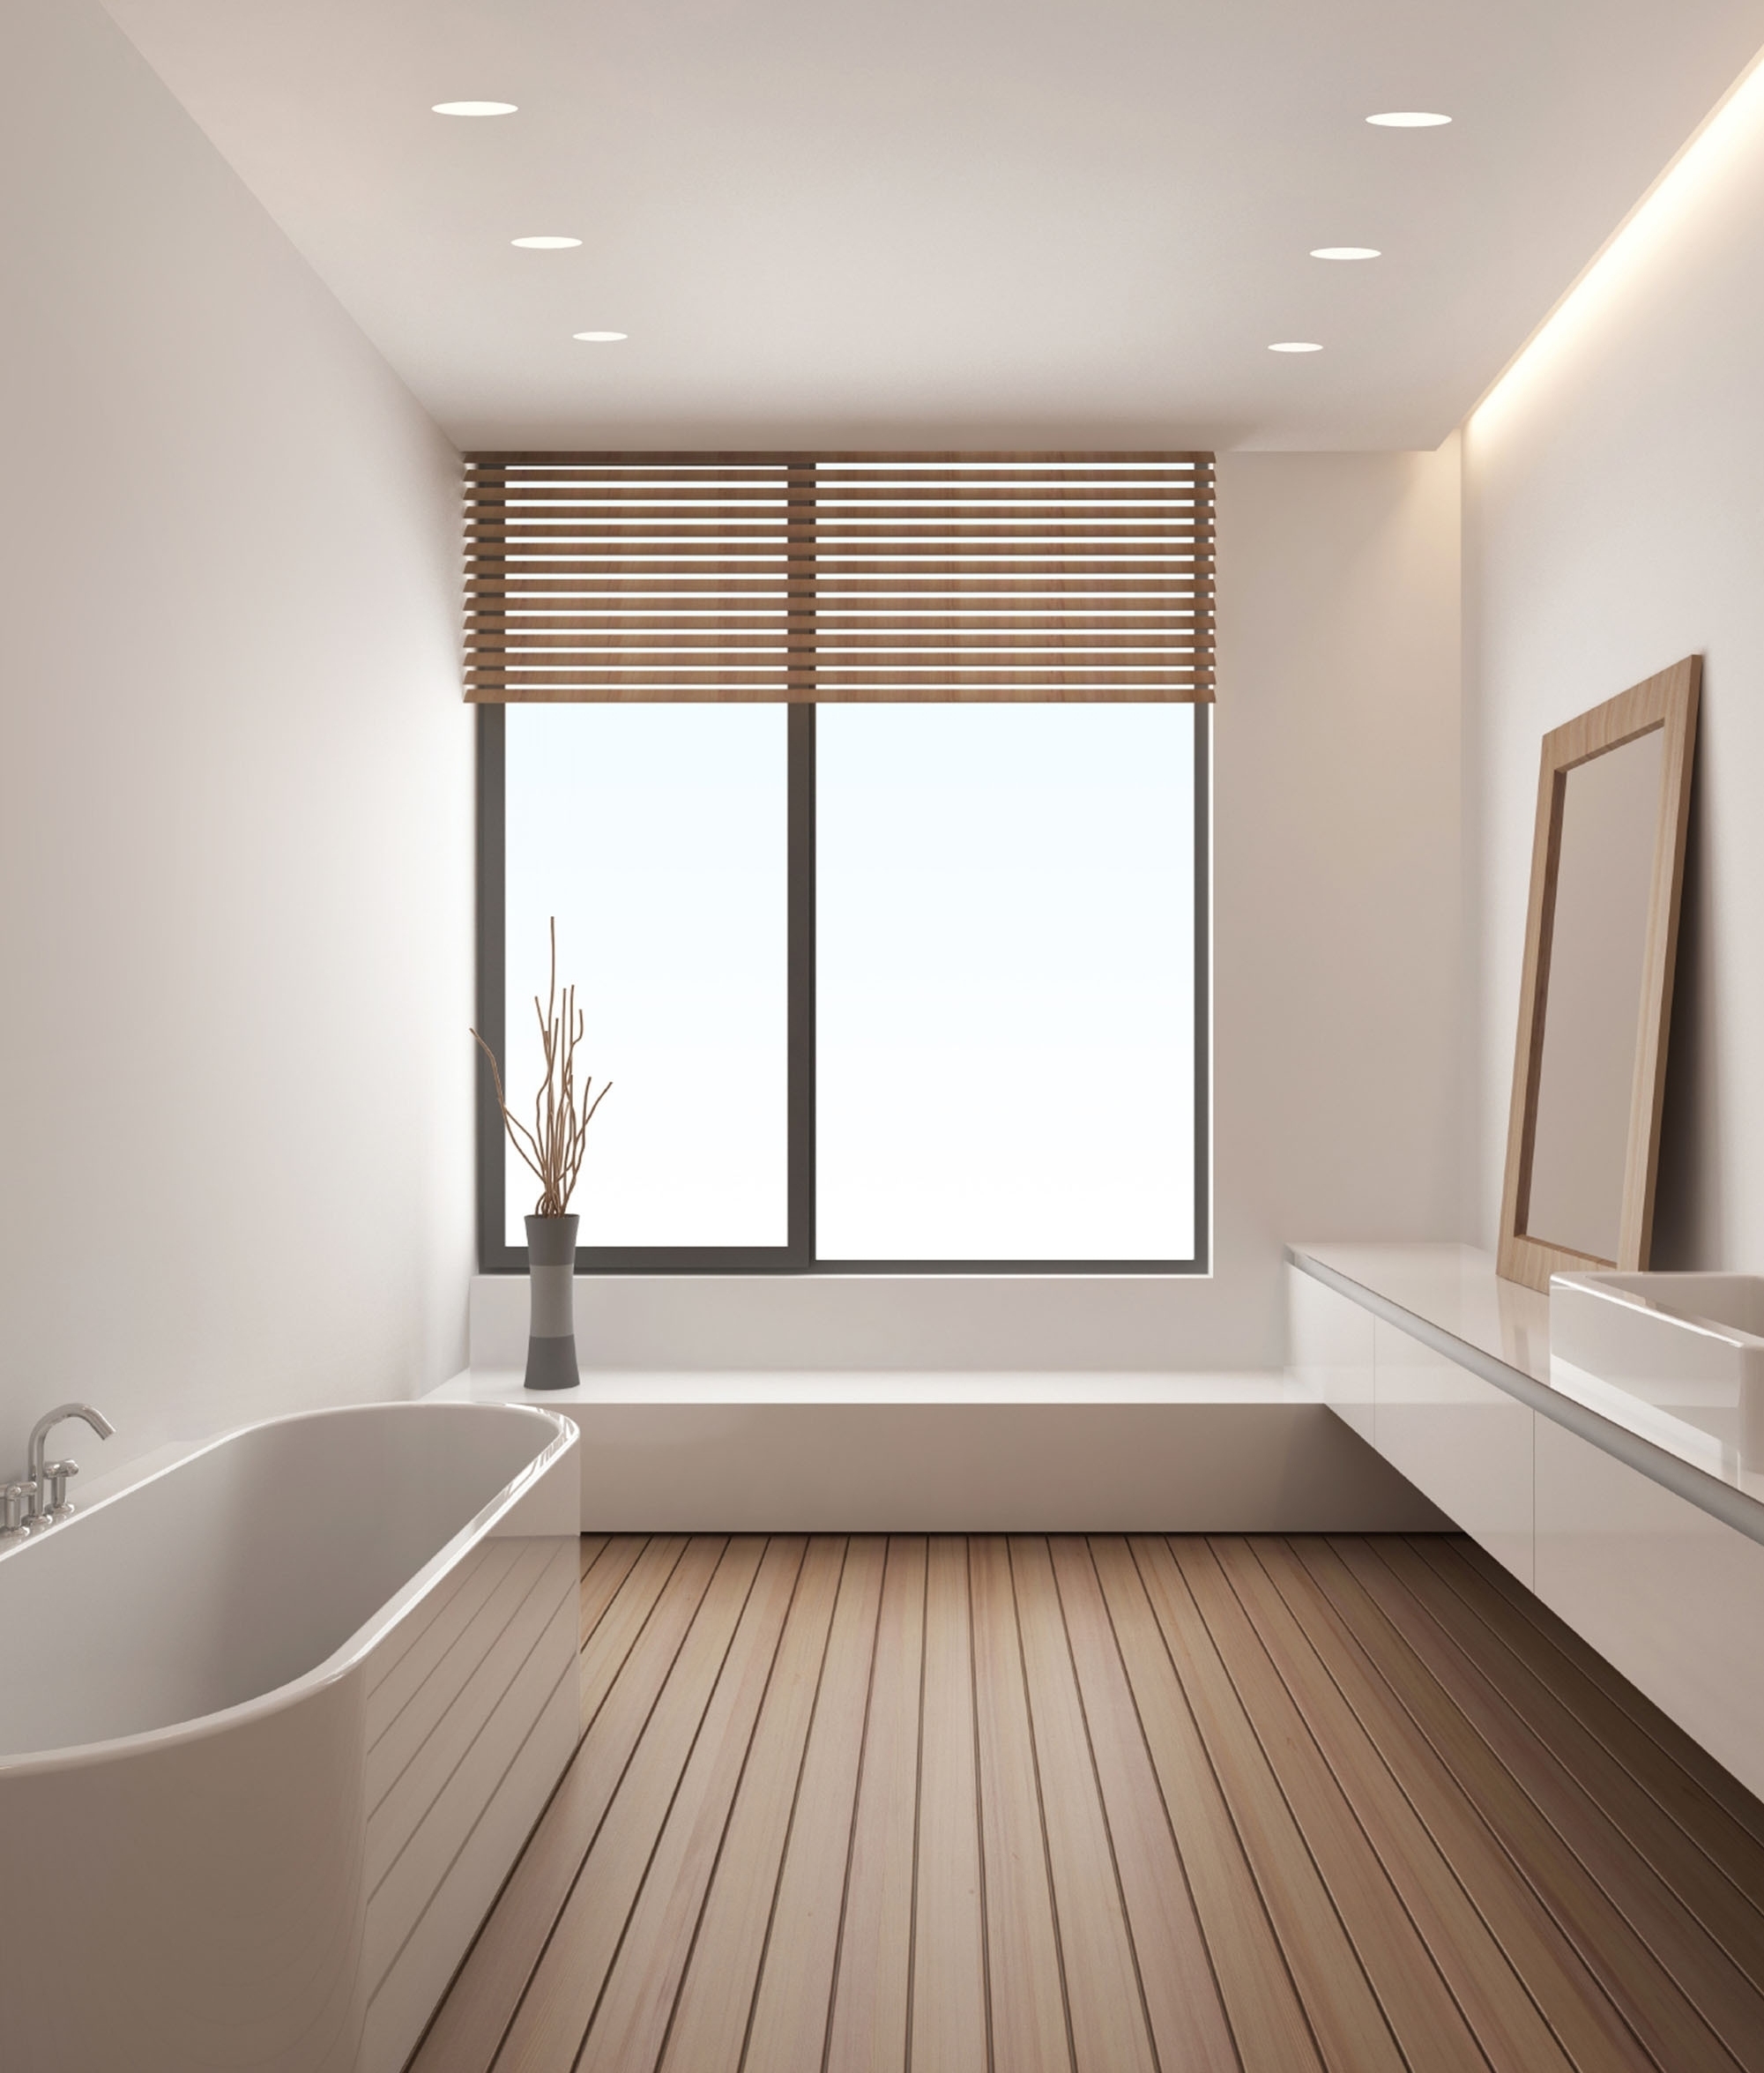 Trimless recessed led downlights